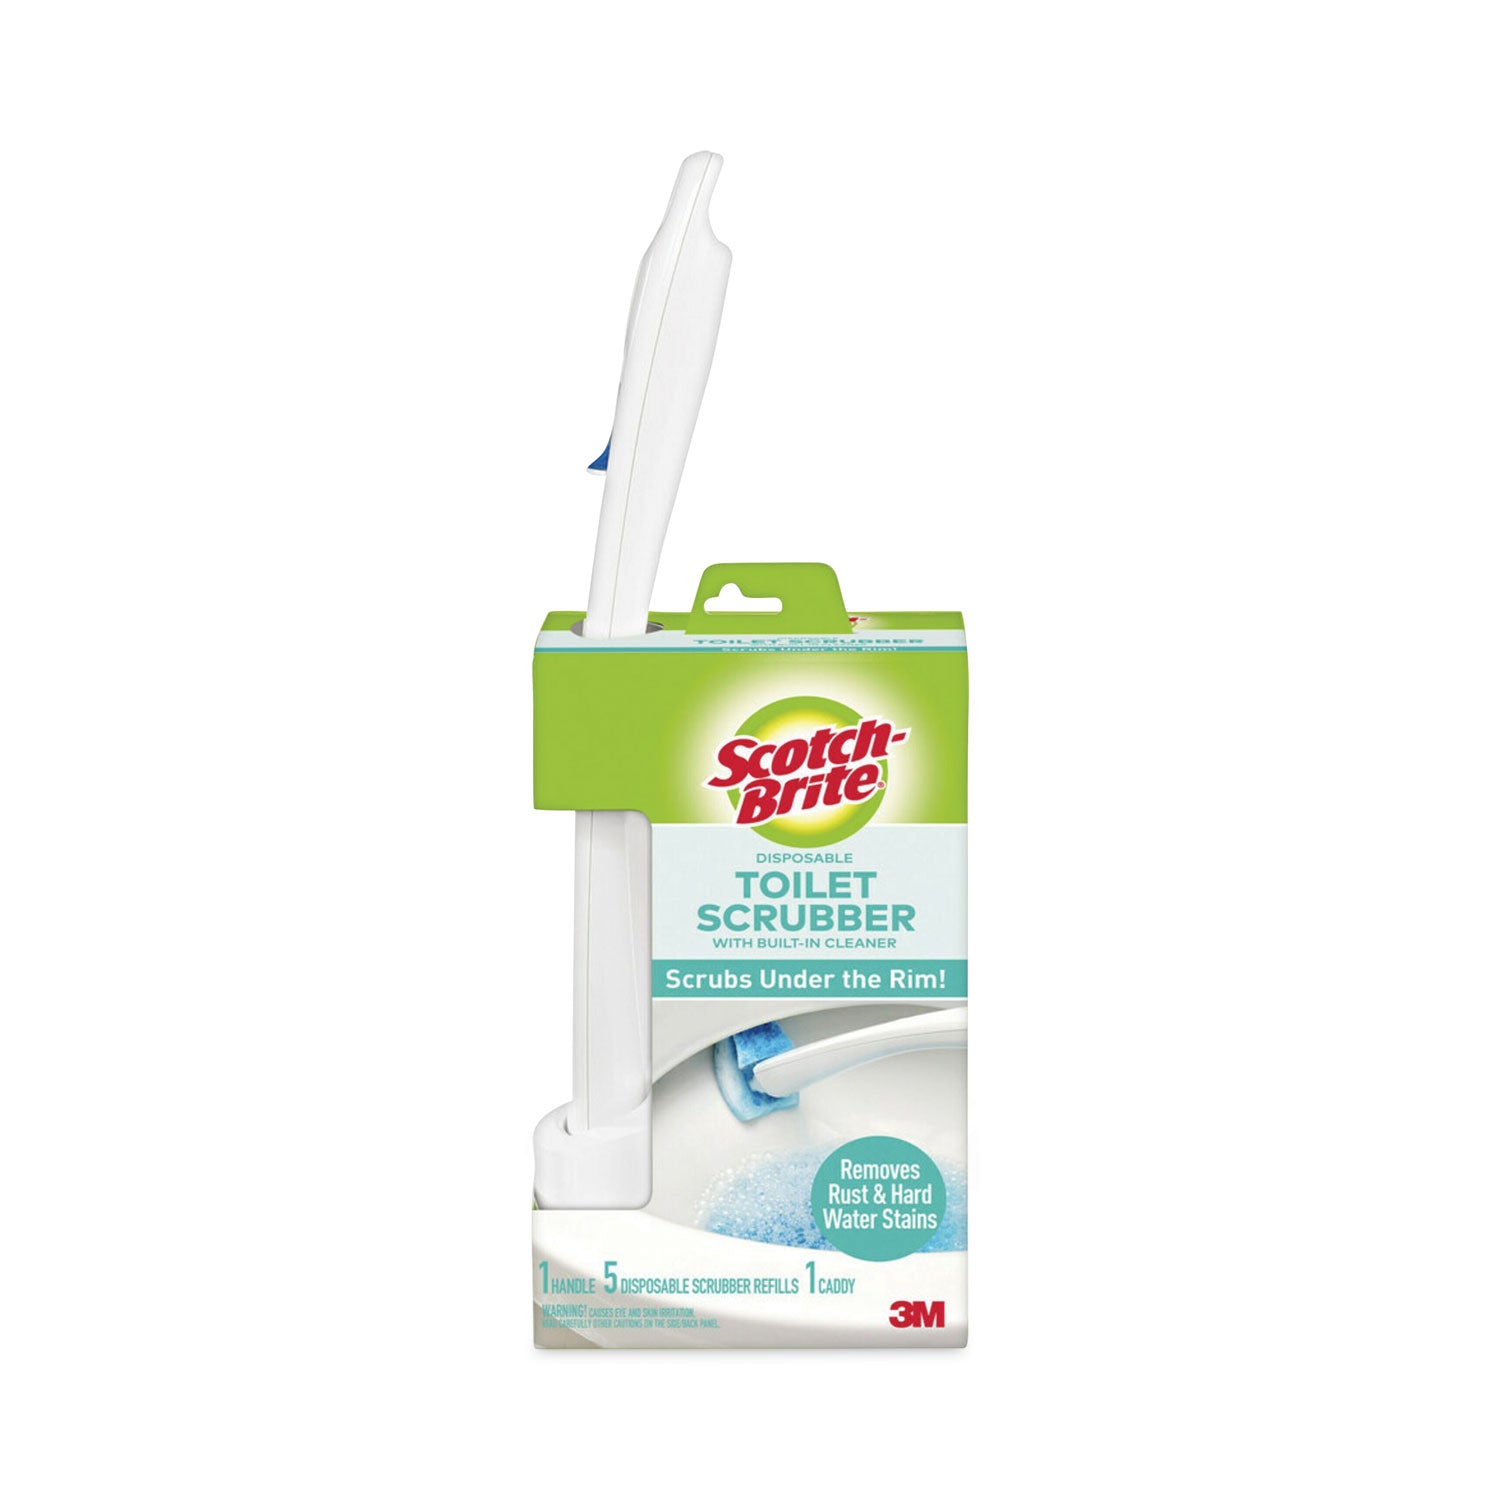 toilet-scrubber-starter-kit-1-handle-and-5-scrubbers-white-blue_mmm558sk4np - 1